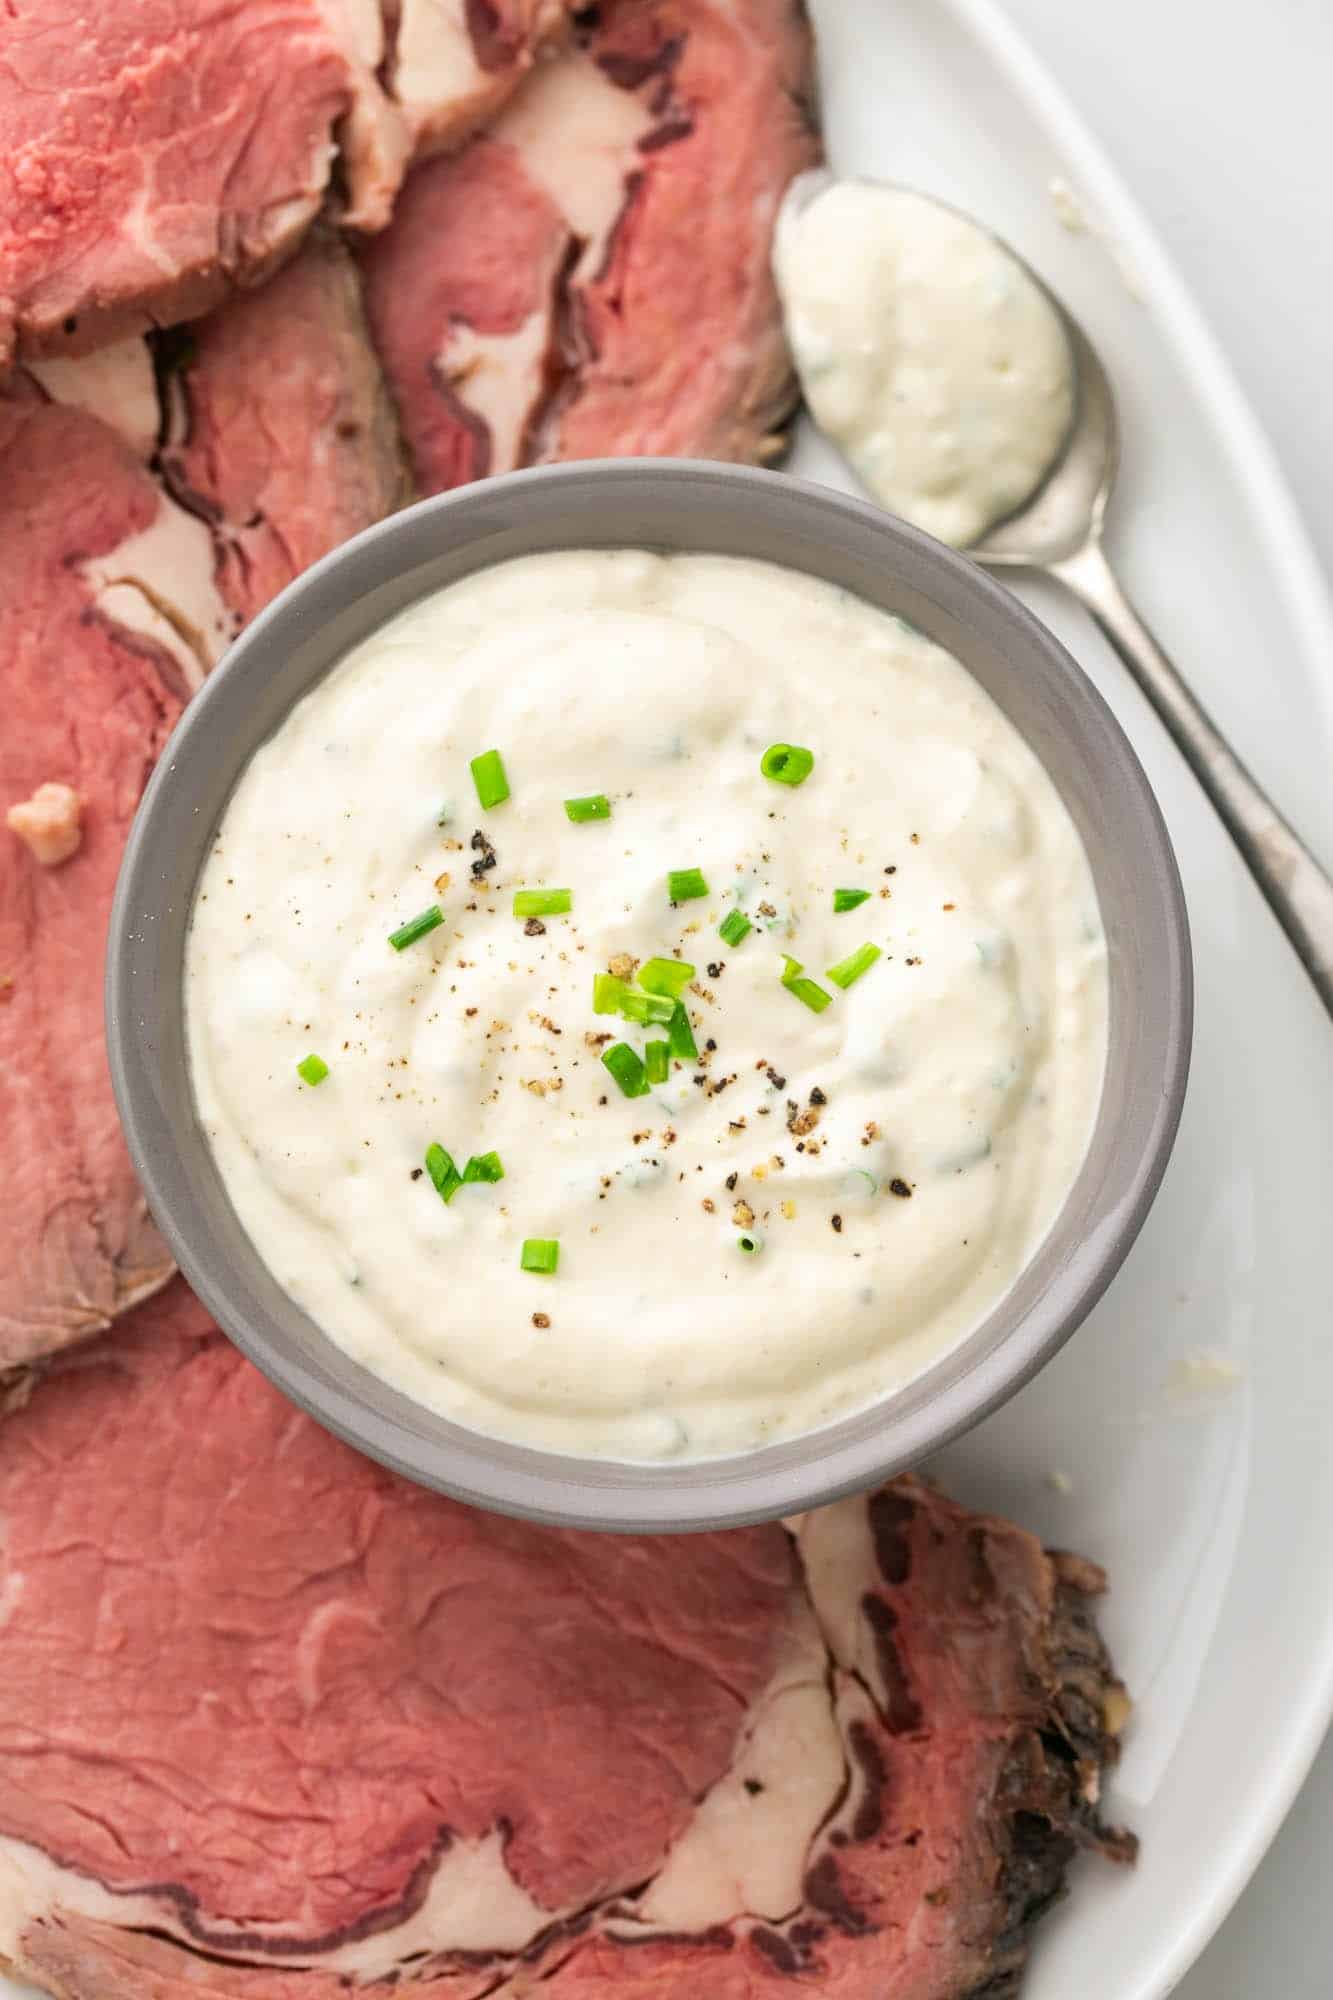 Overhead shot of horseradish sauce in a bowl, with prime rib slices on the side.